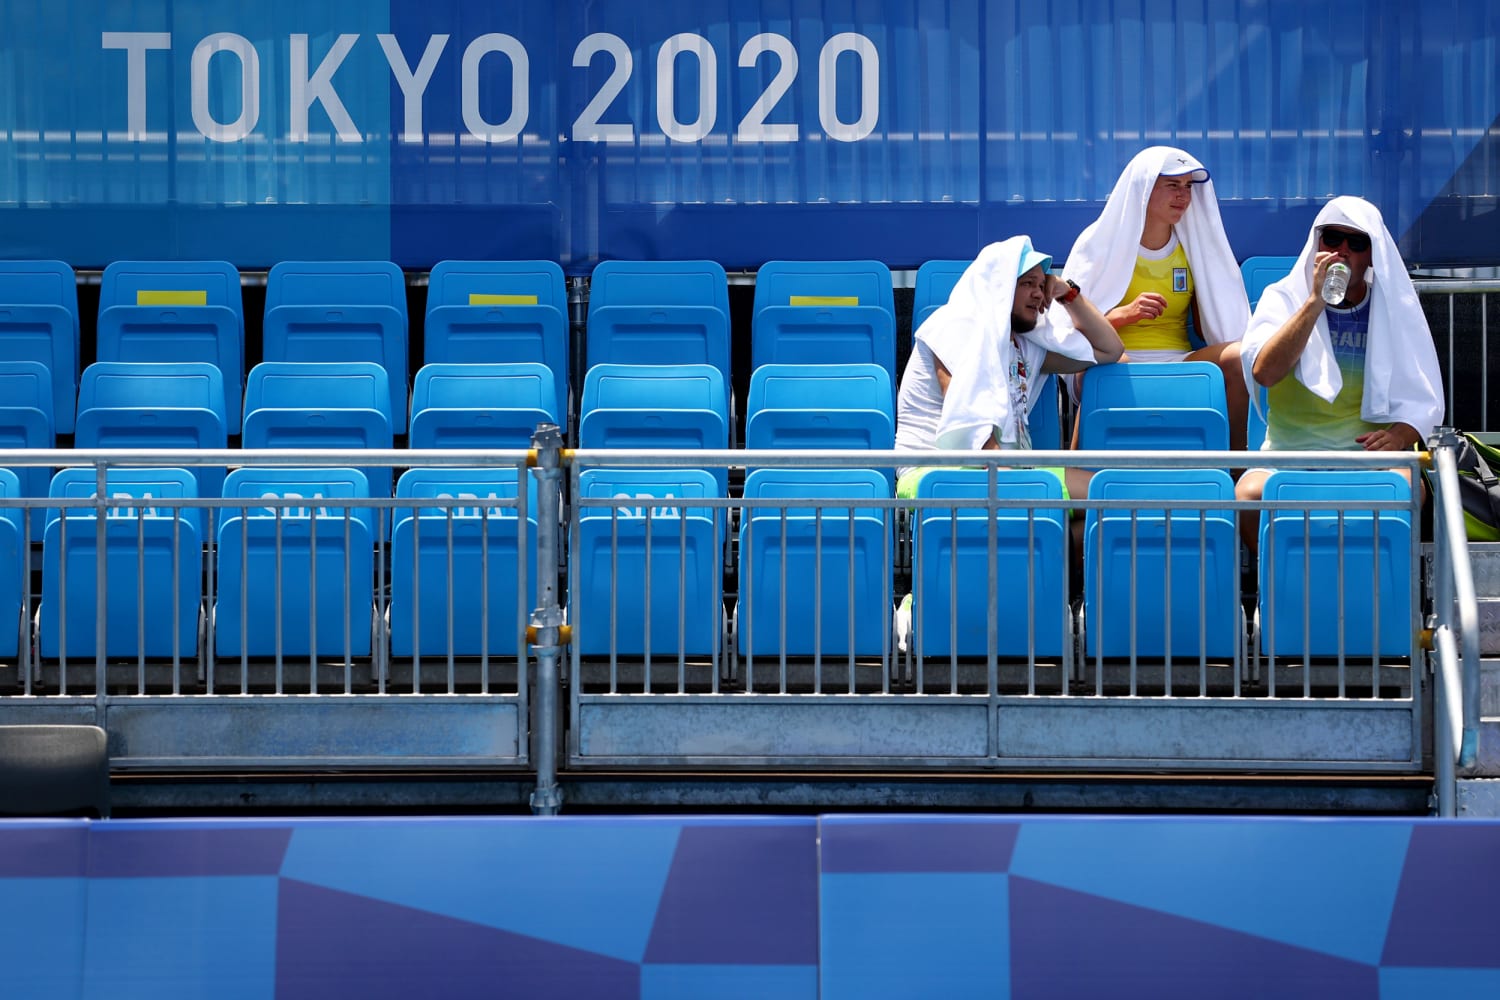 Heat wave hits Tokyo as Olympic organizers battle to keep Covid rates down